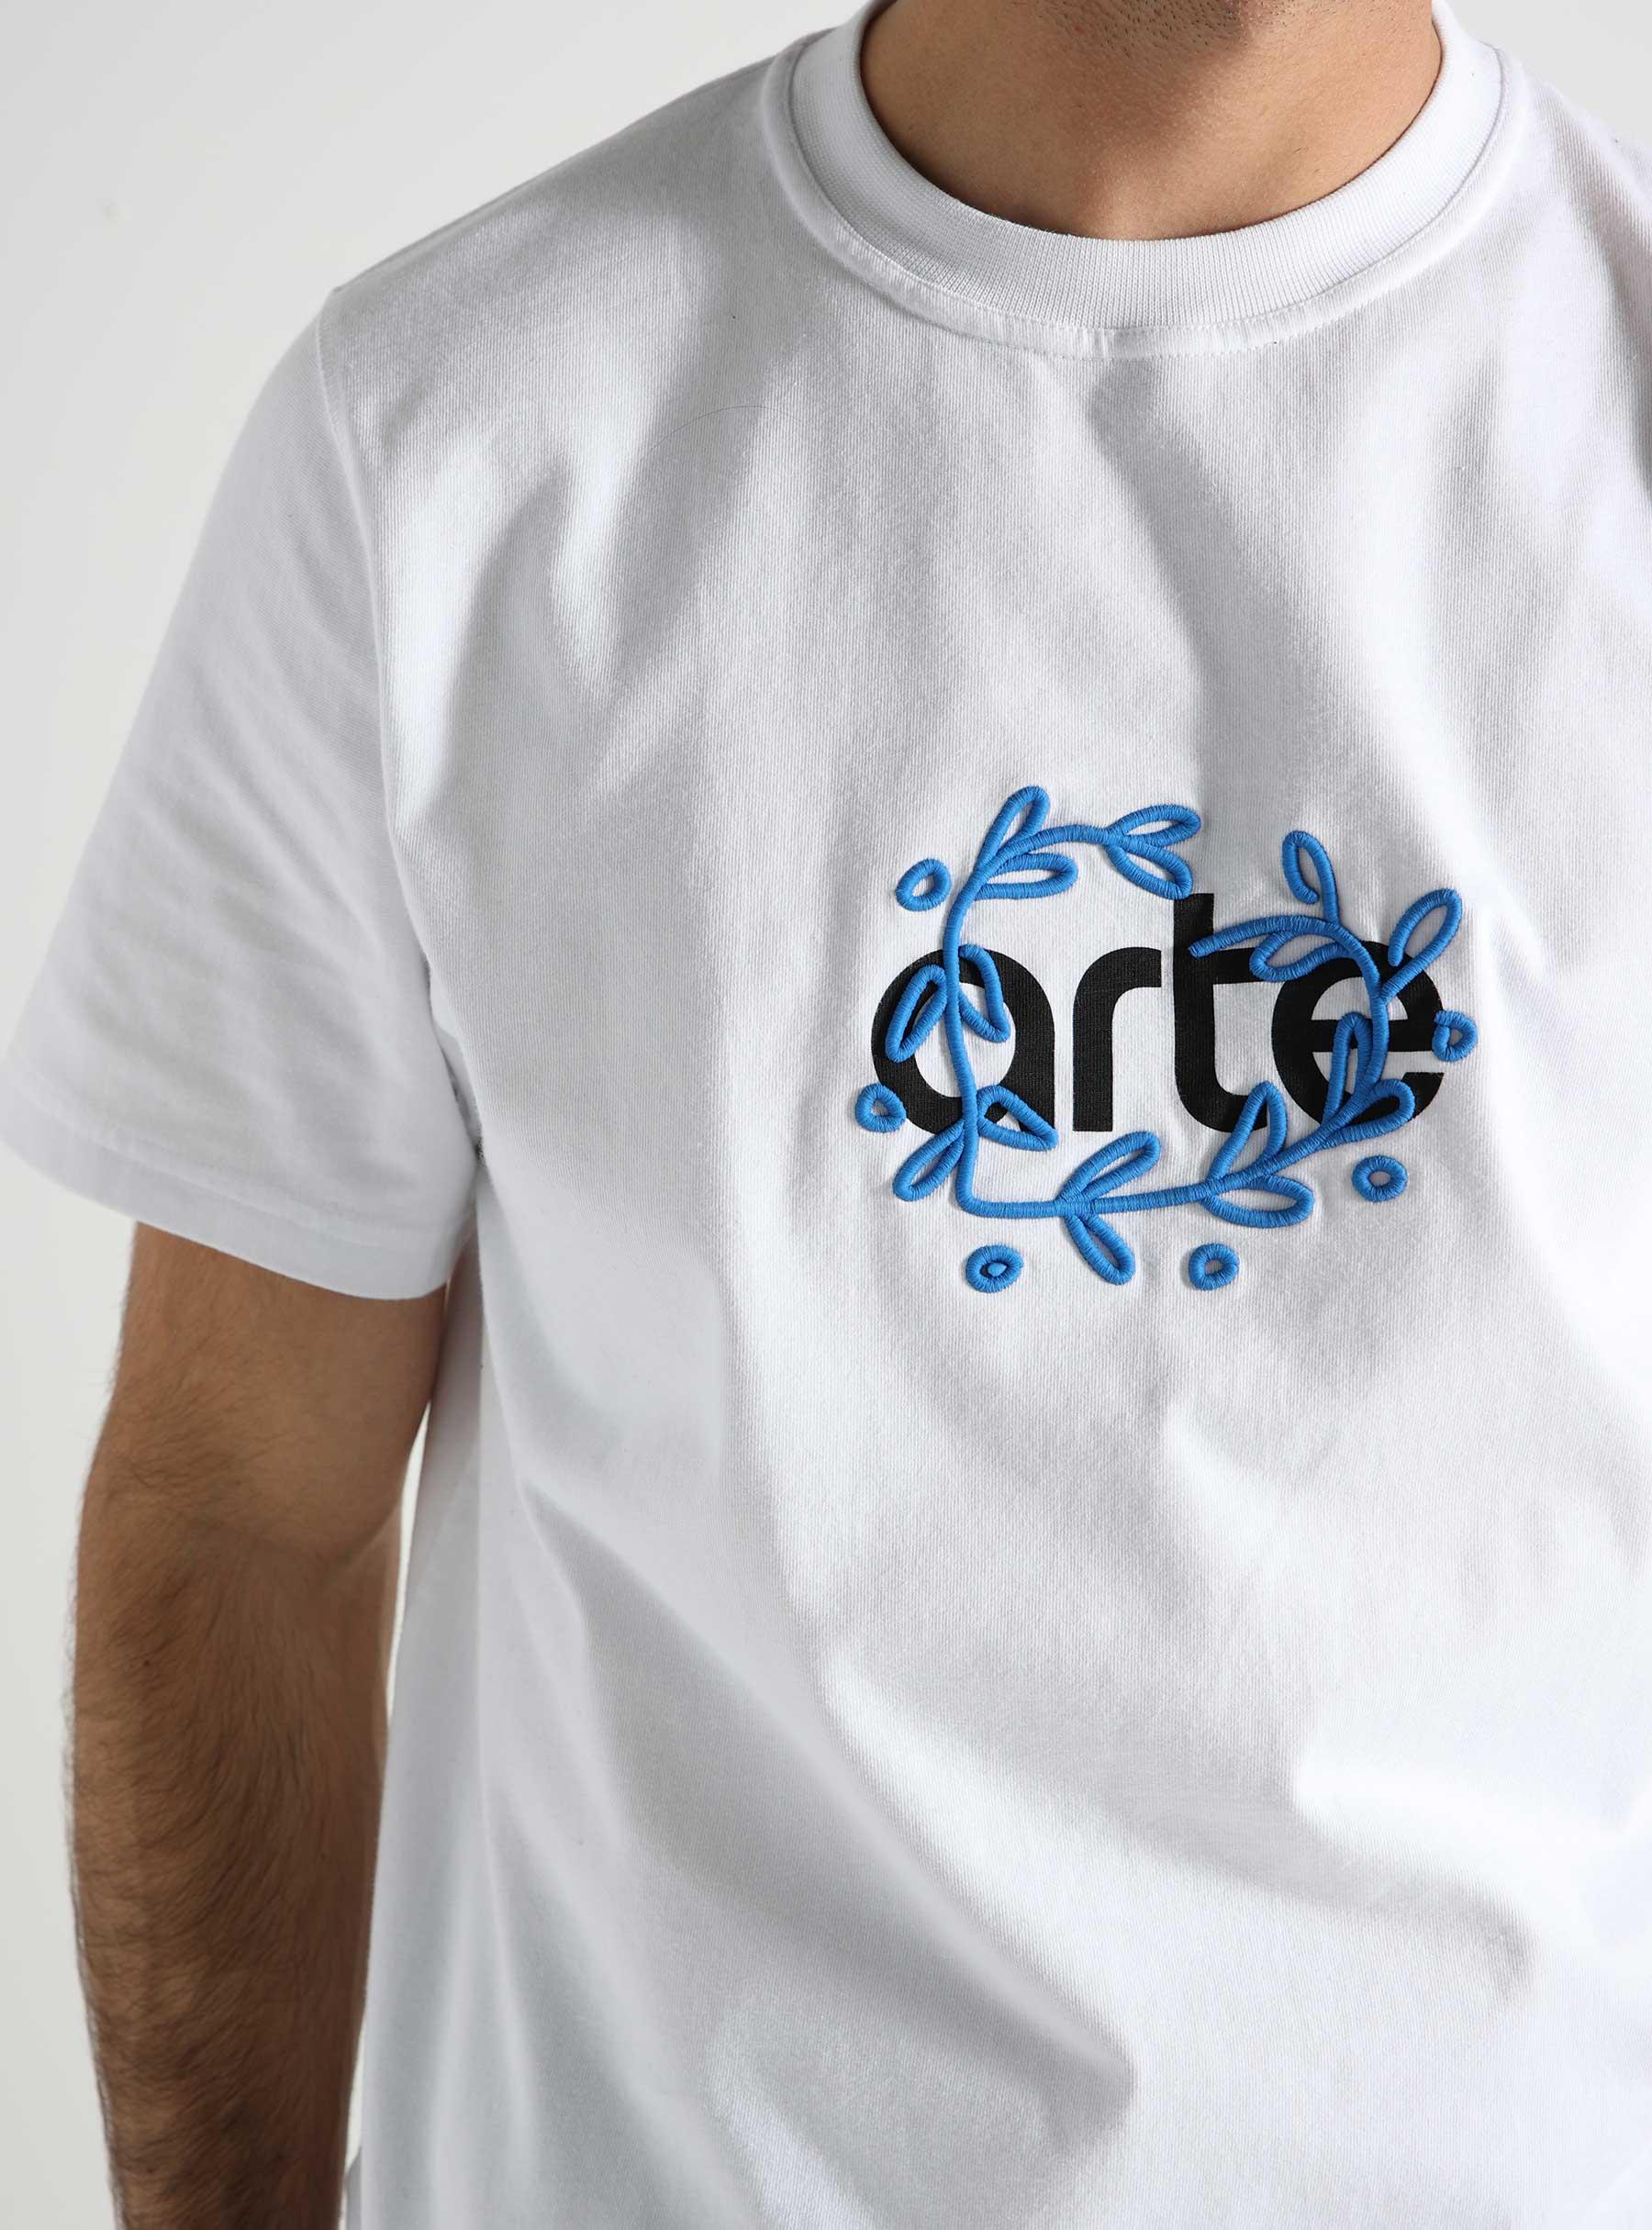 Teo Arte Front T-shirt White SS24-017T